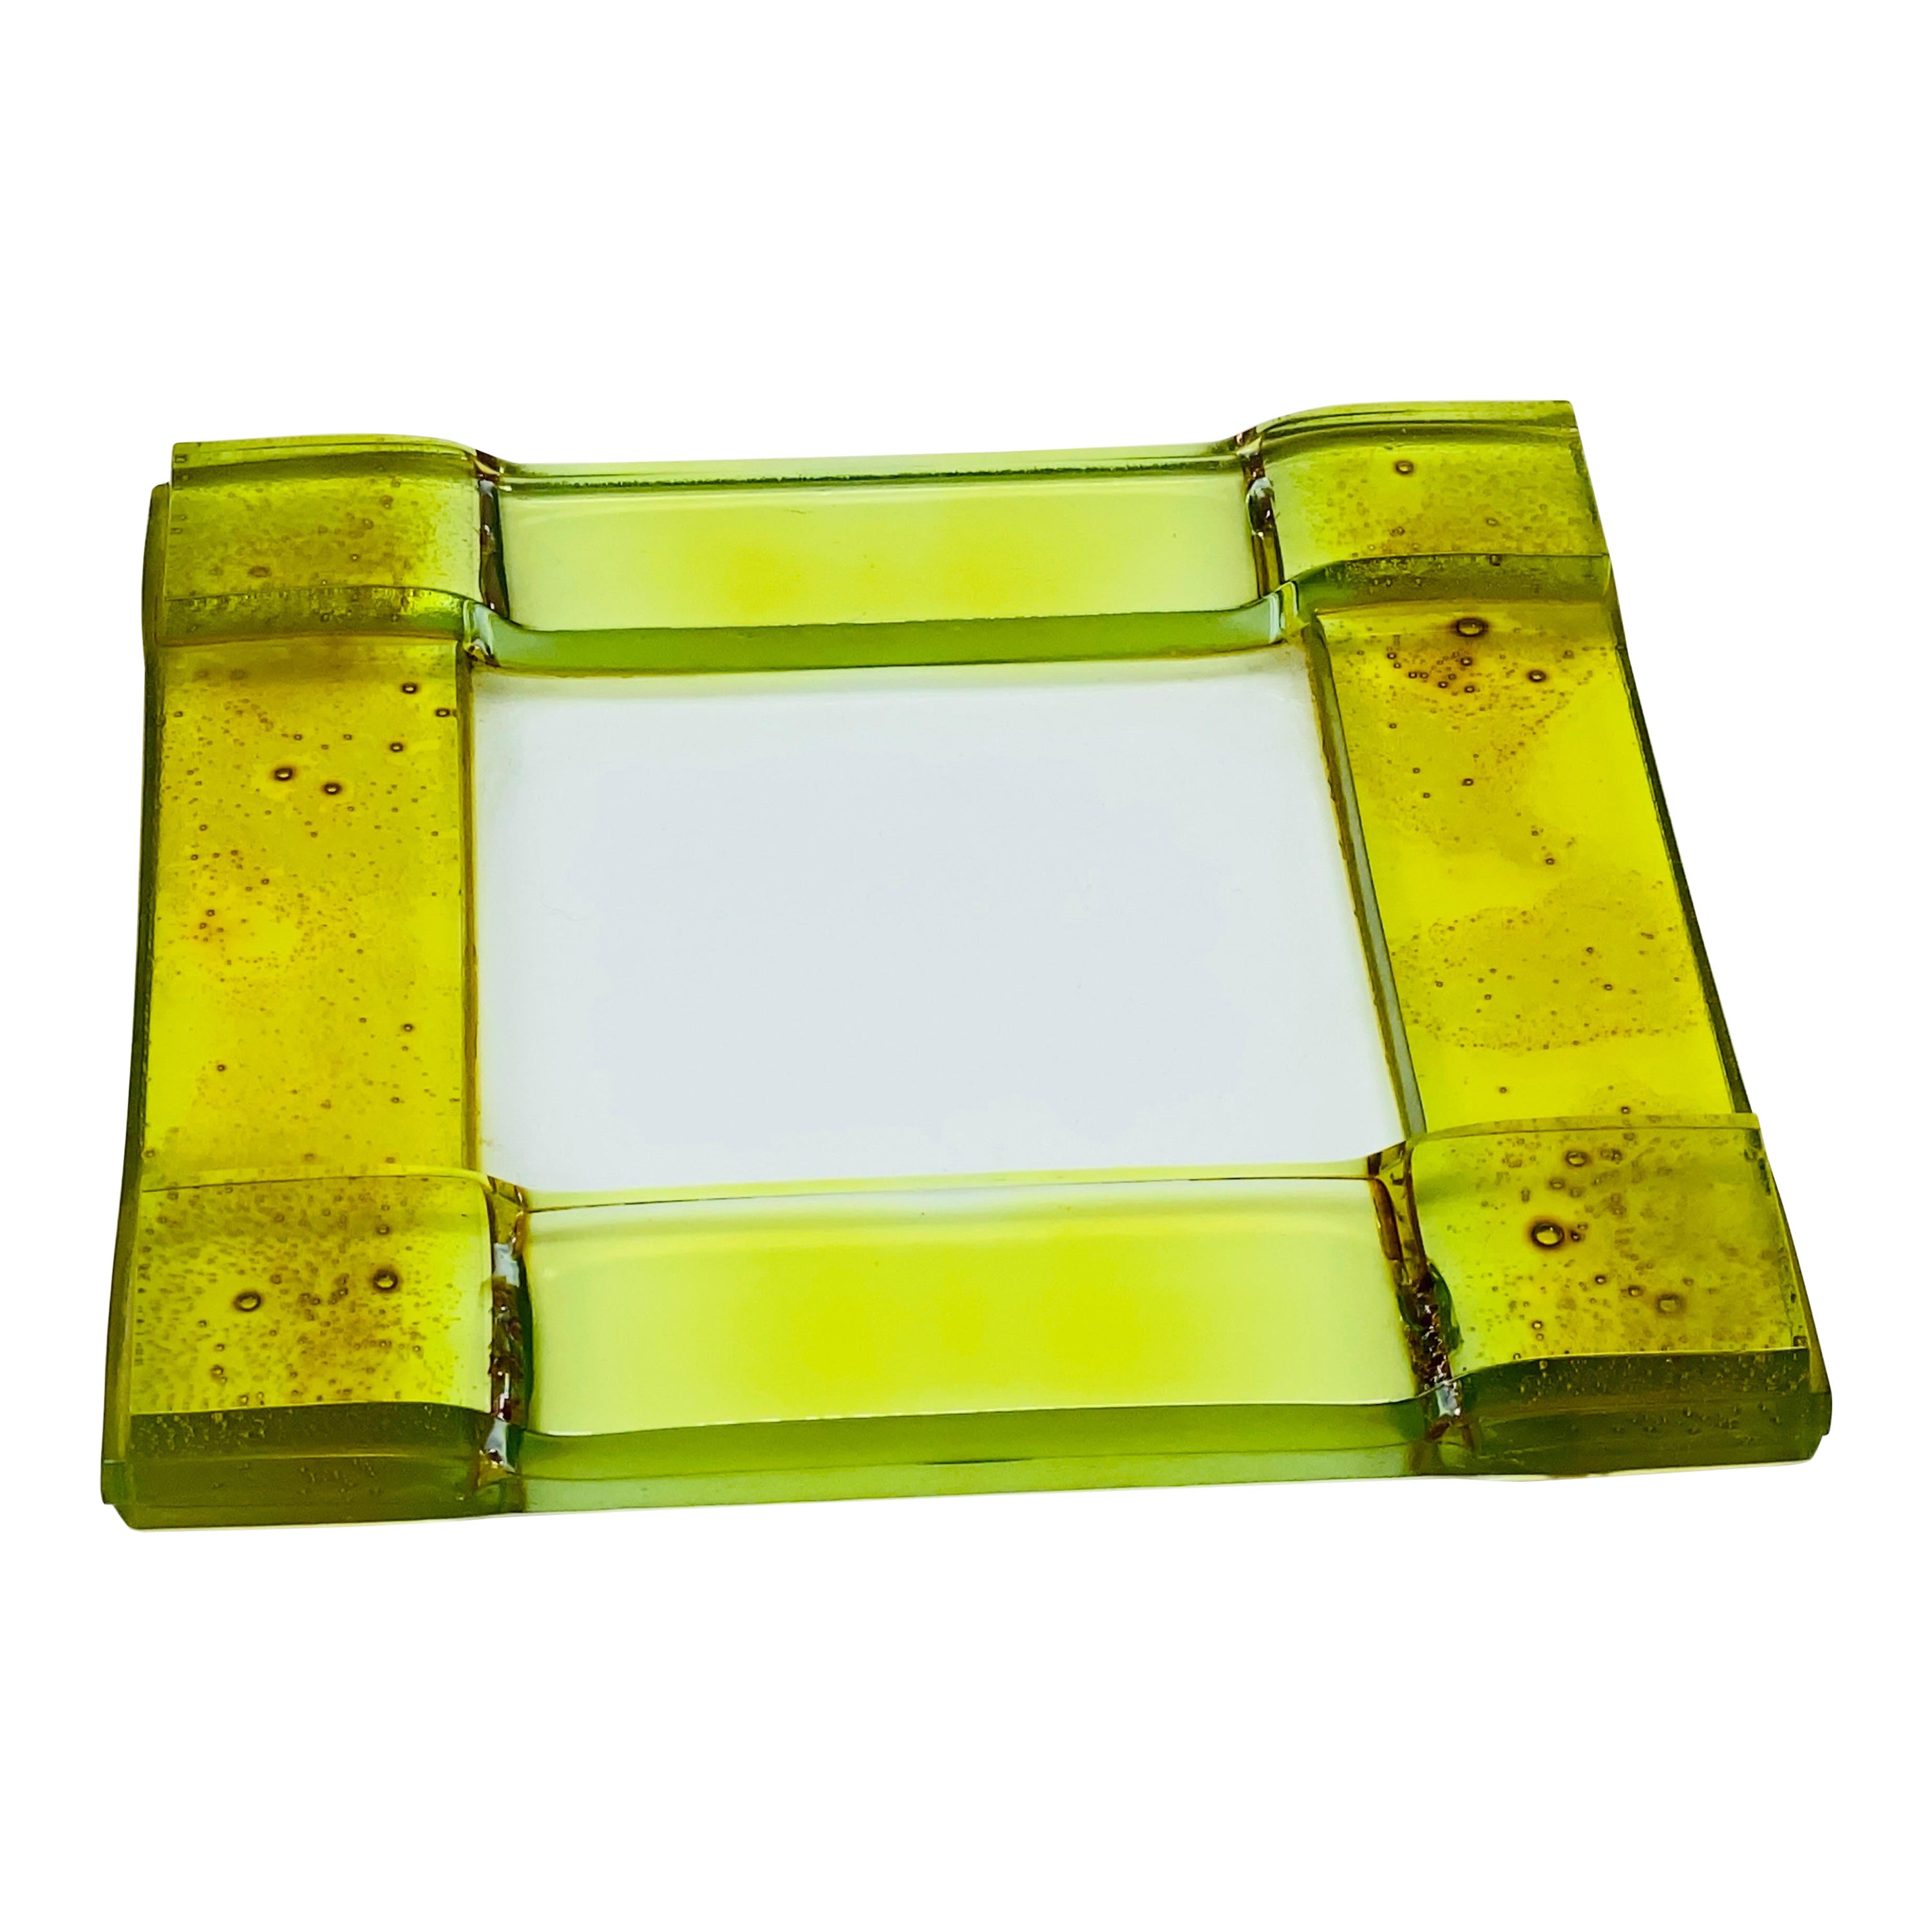 Glass Trivet by Poliarte, Green Color, Made in Italy in the 1960's